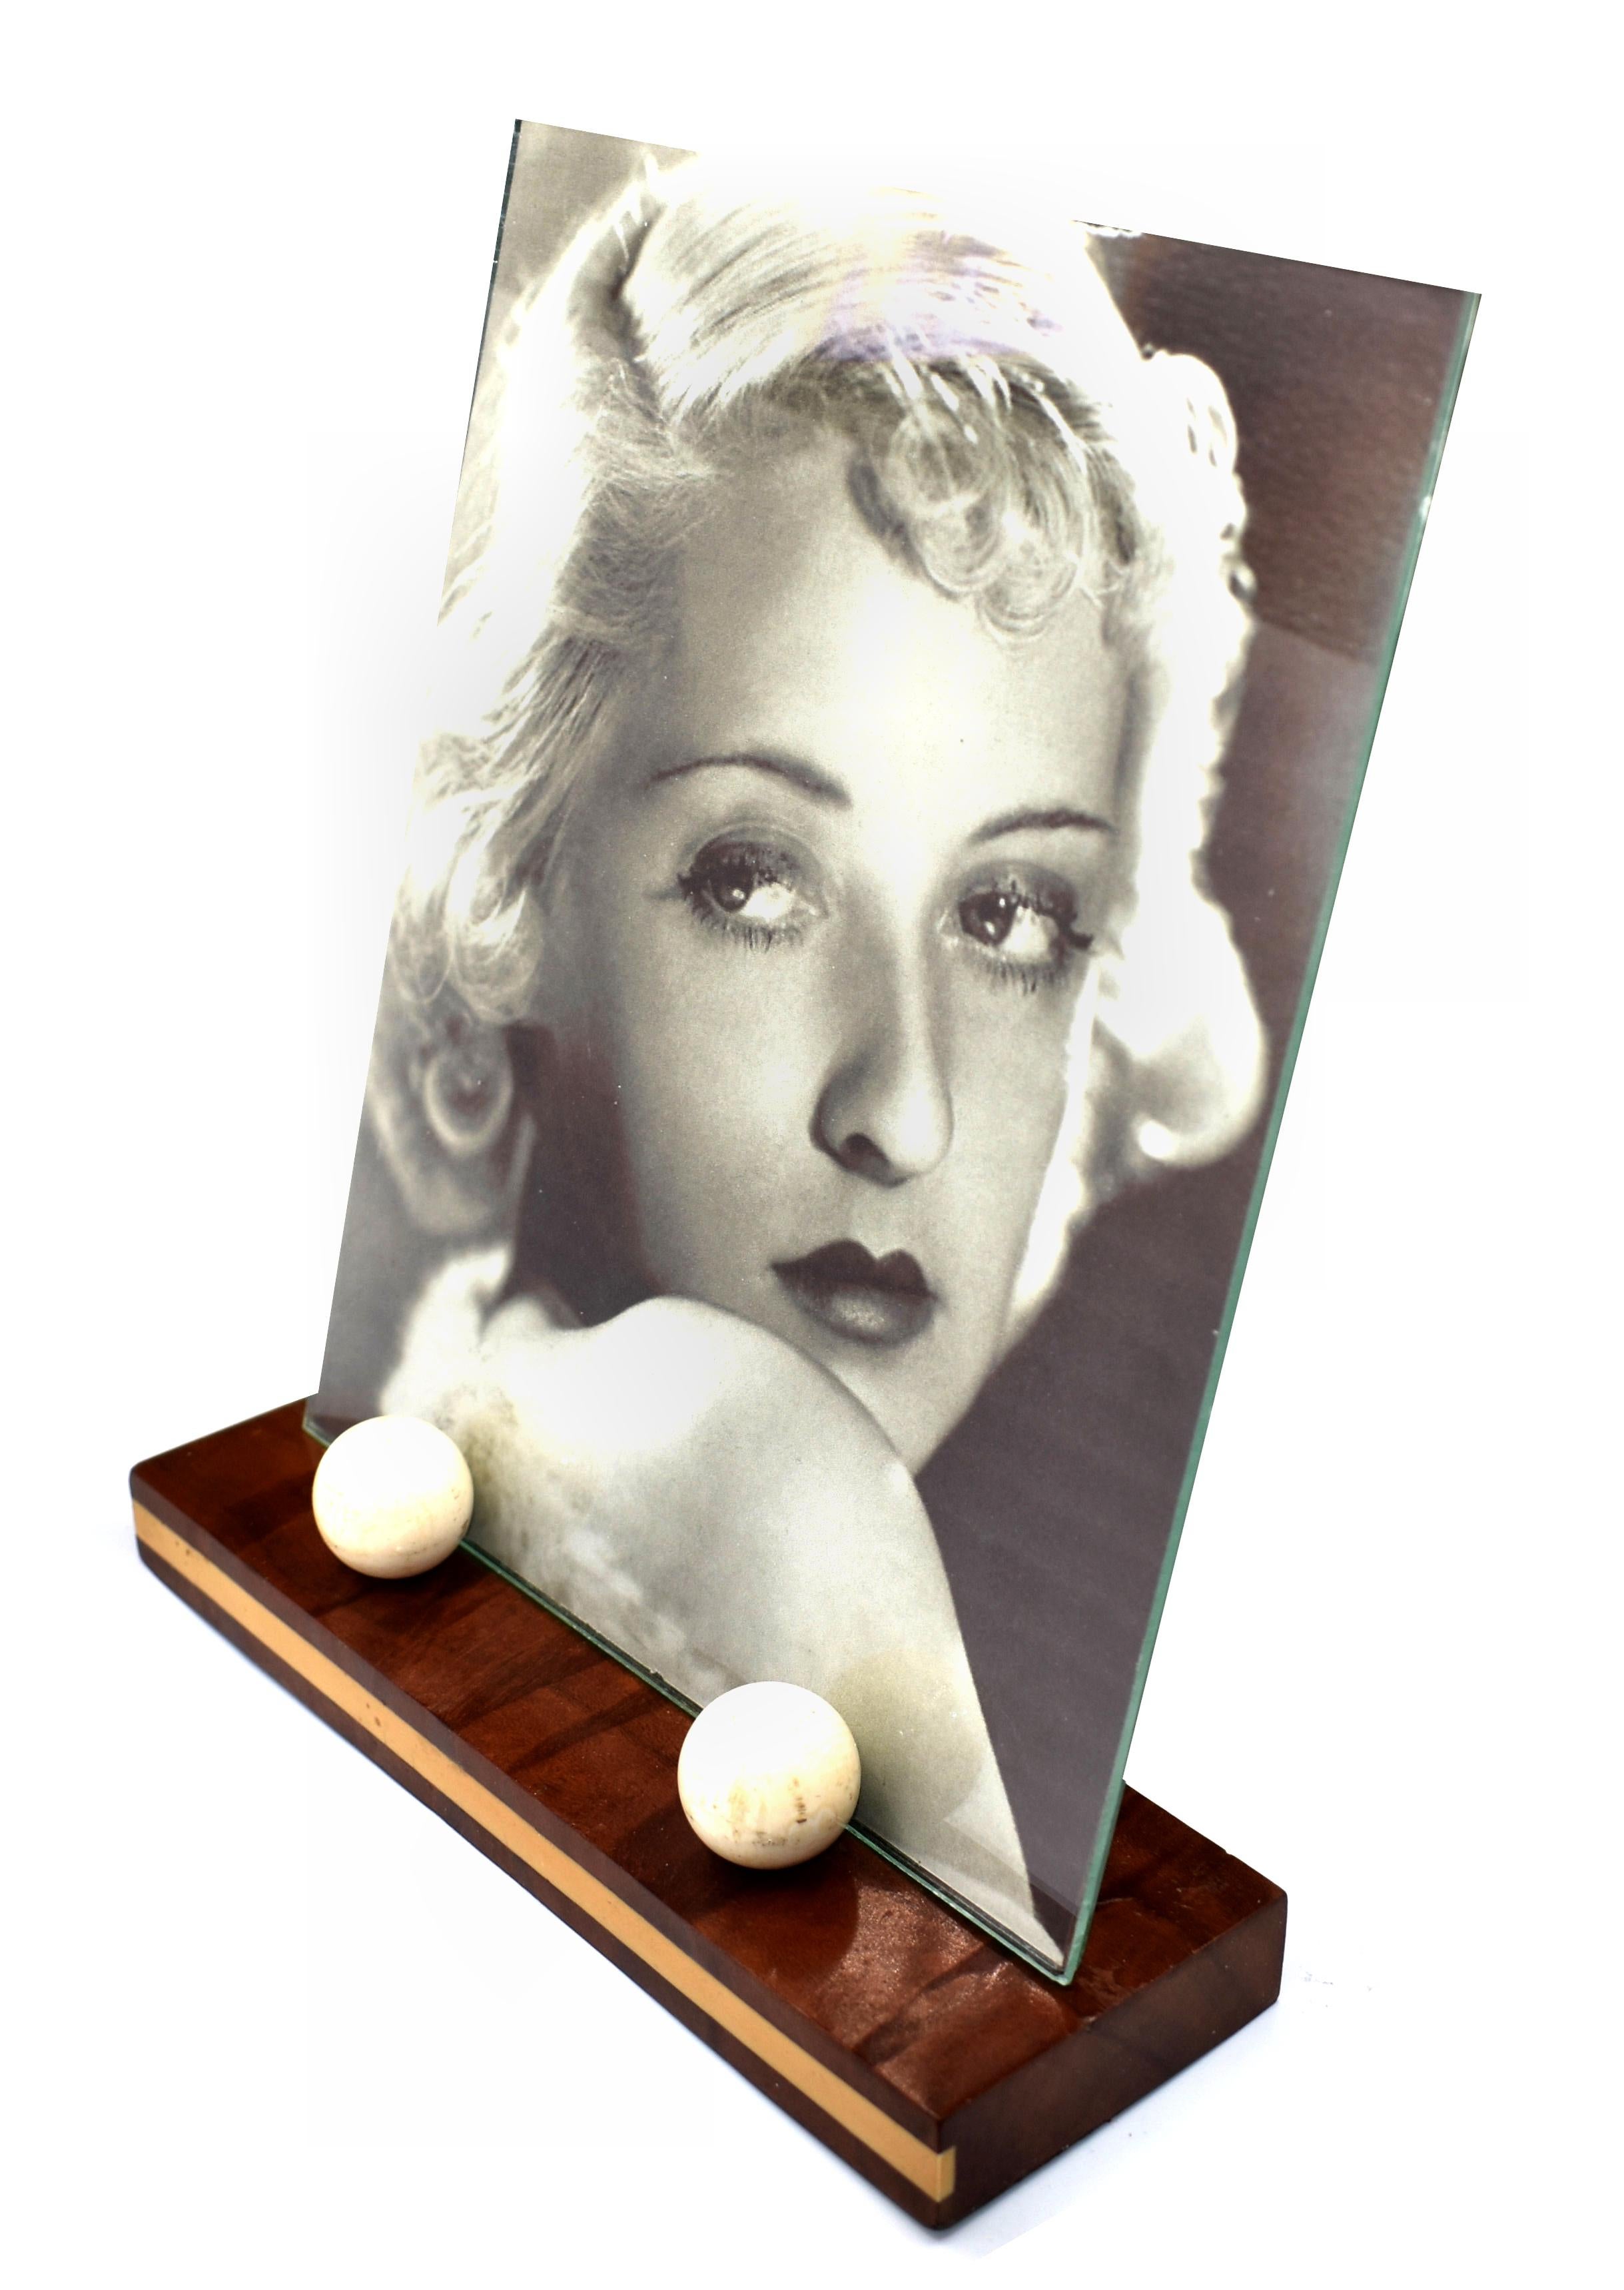 For your consideration is this stylish 1930s Art Deco picture frame. Features a two tone wooden base with white bakelite balls which act as the glass holders. Lovely stylish piece, sourced in France and dating to the 1930s. The photo of Betty Davis